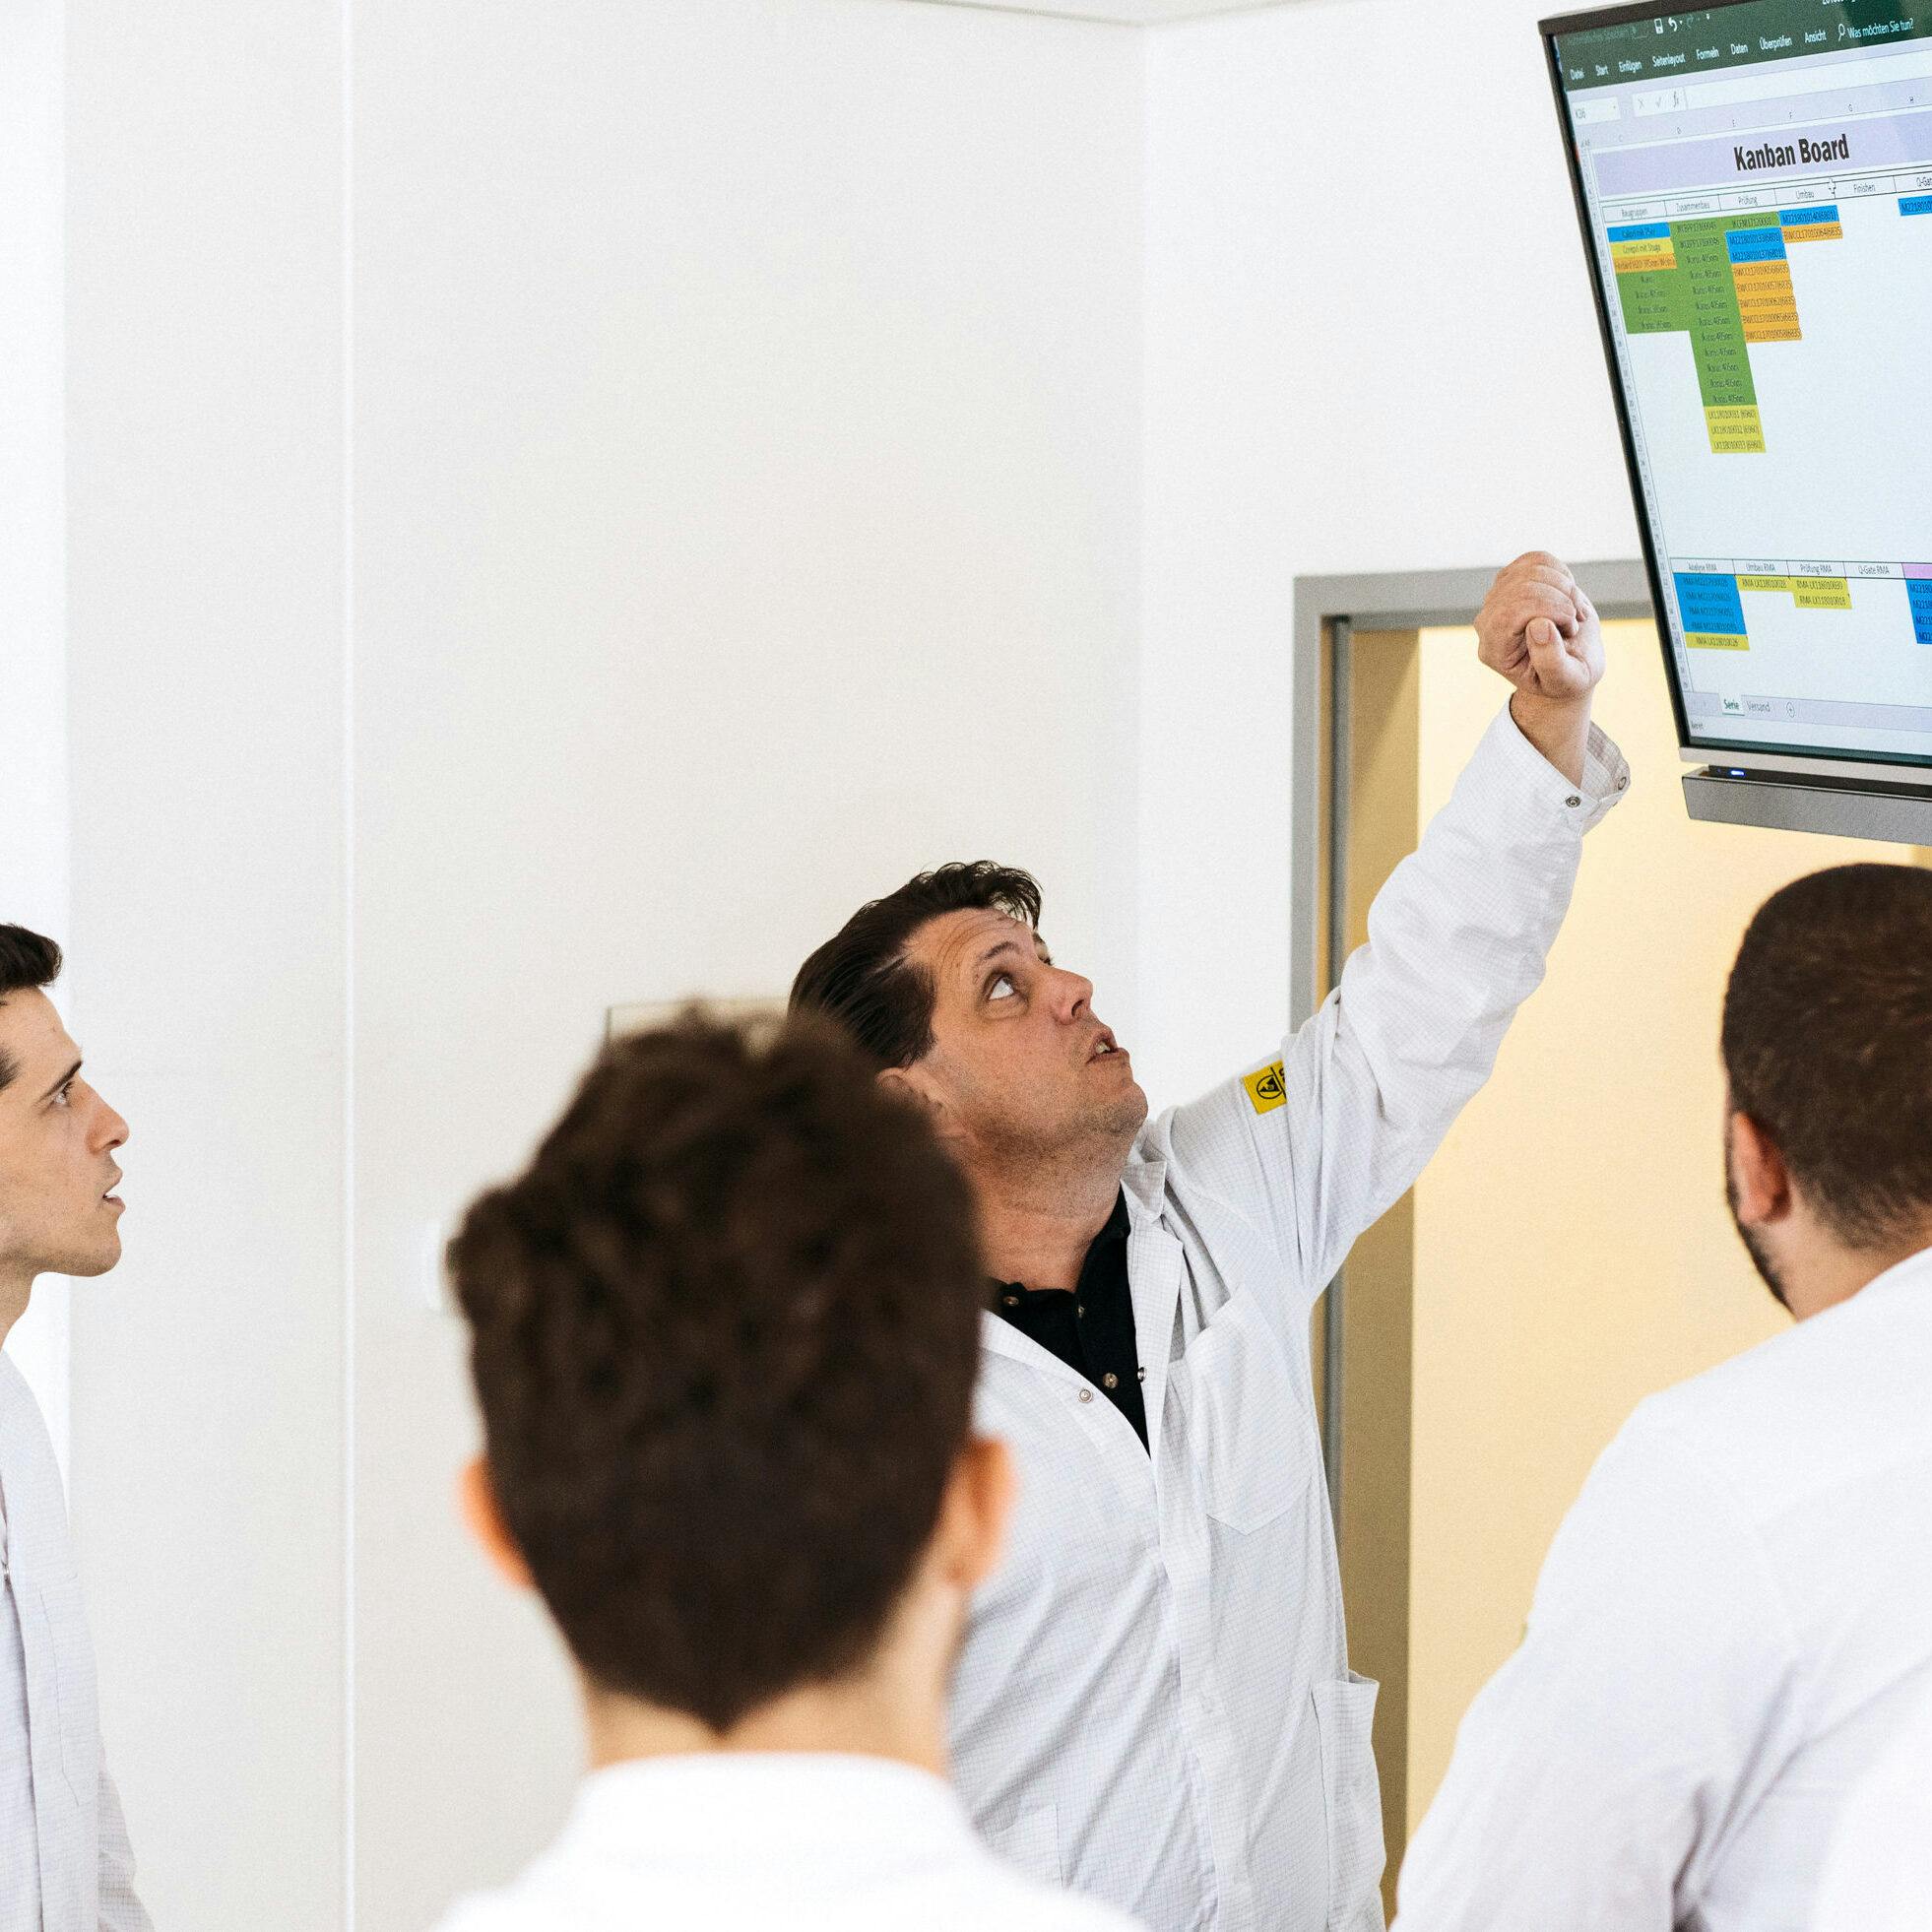 Stand-up meeting in front of an electronic Kanban board